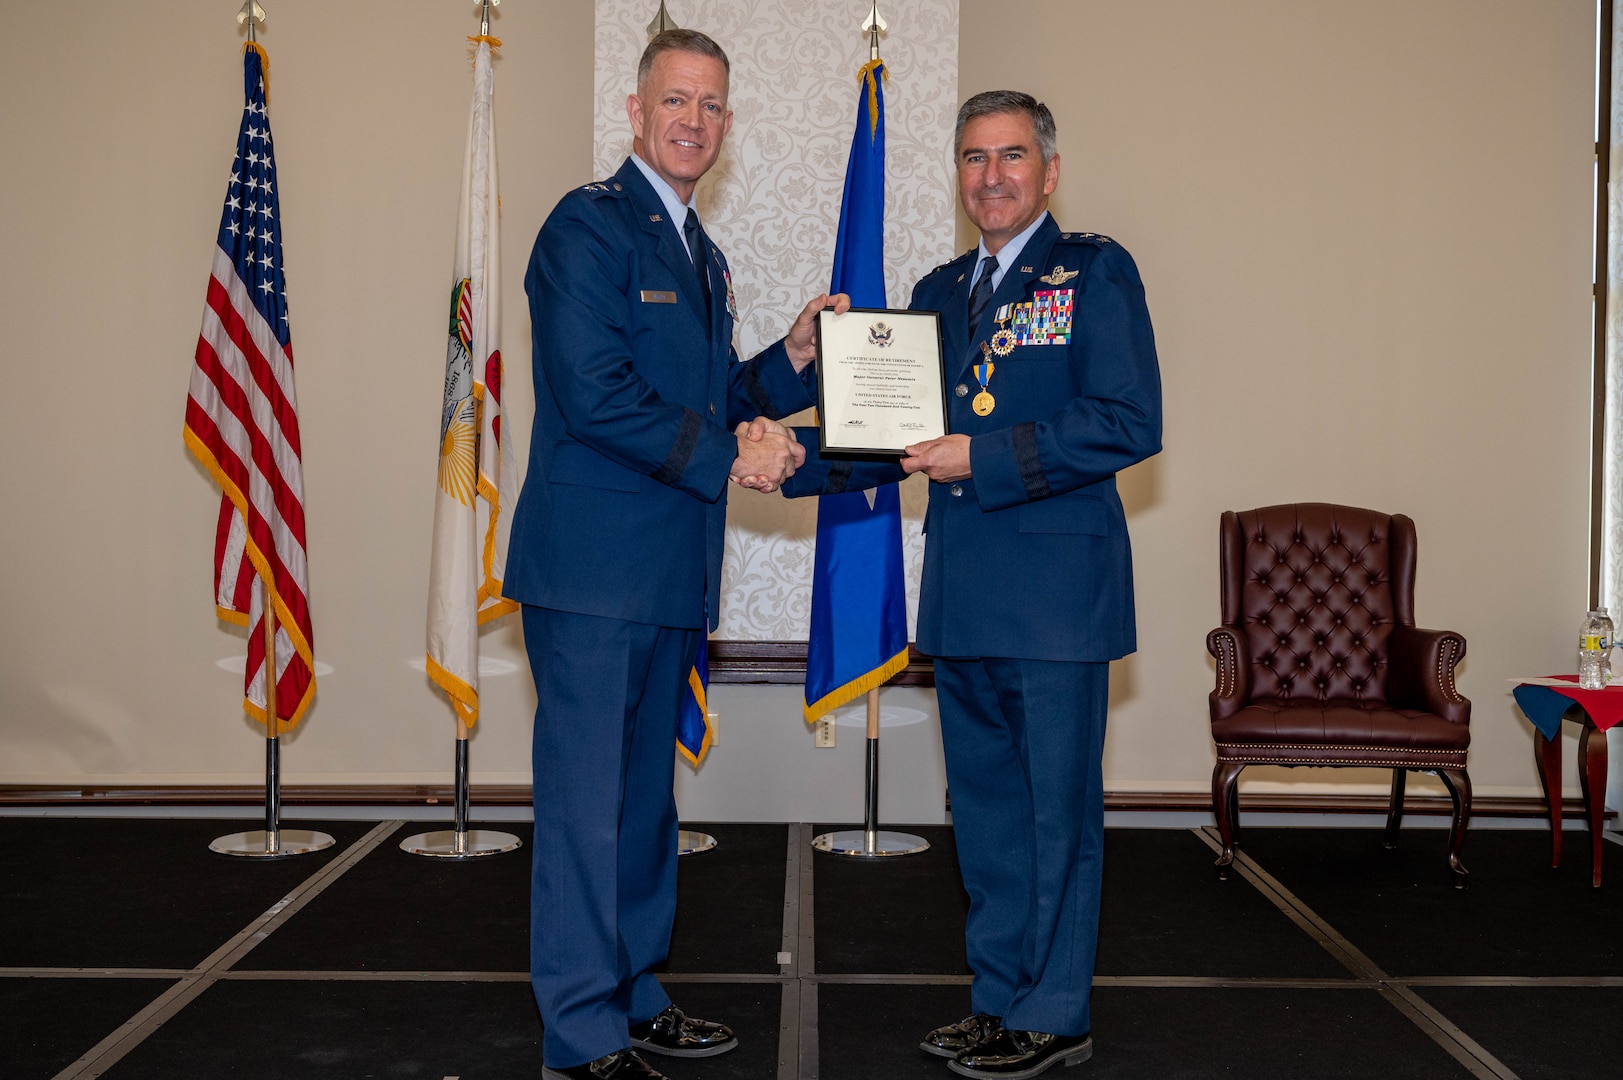 Maj. Gen. Peter Nezamis is presented with a certificate of retirement by Maj. Gen. Rich Neely, the Adjutant General of Illinois and Commander of the Illinois National Guard, during a retirement ceremony June 17 at the 126th Air Refueling Wing, based at Scott Air Base, Belleville, Illinois.